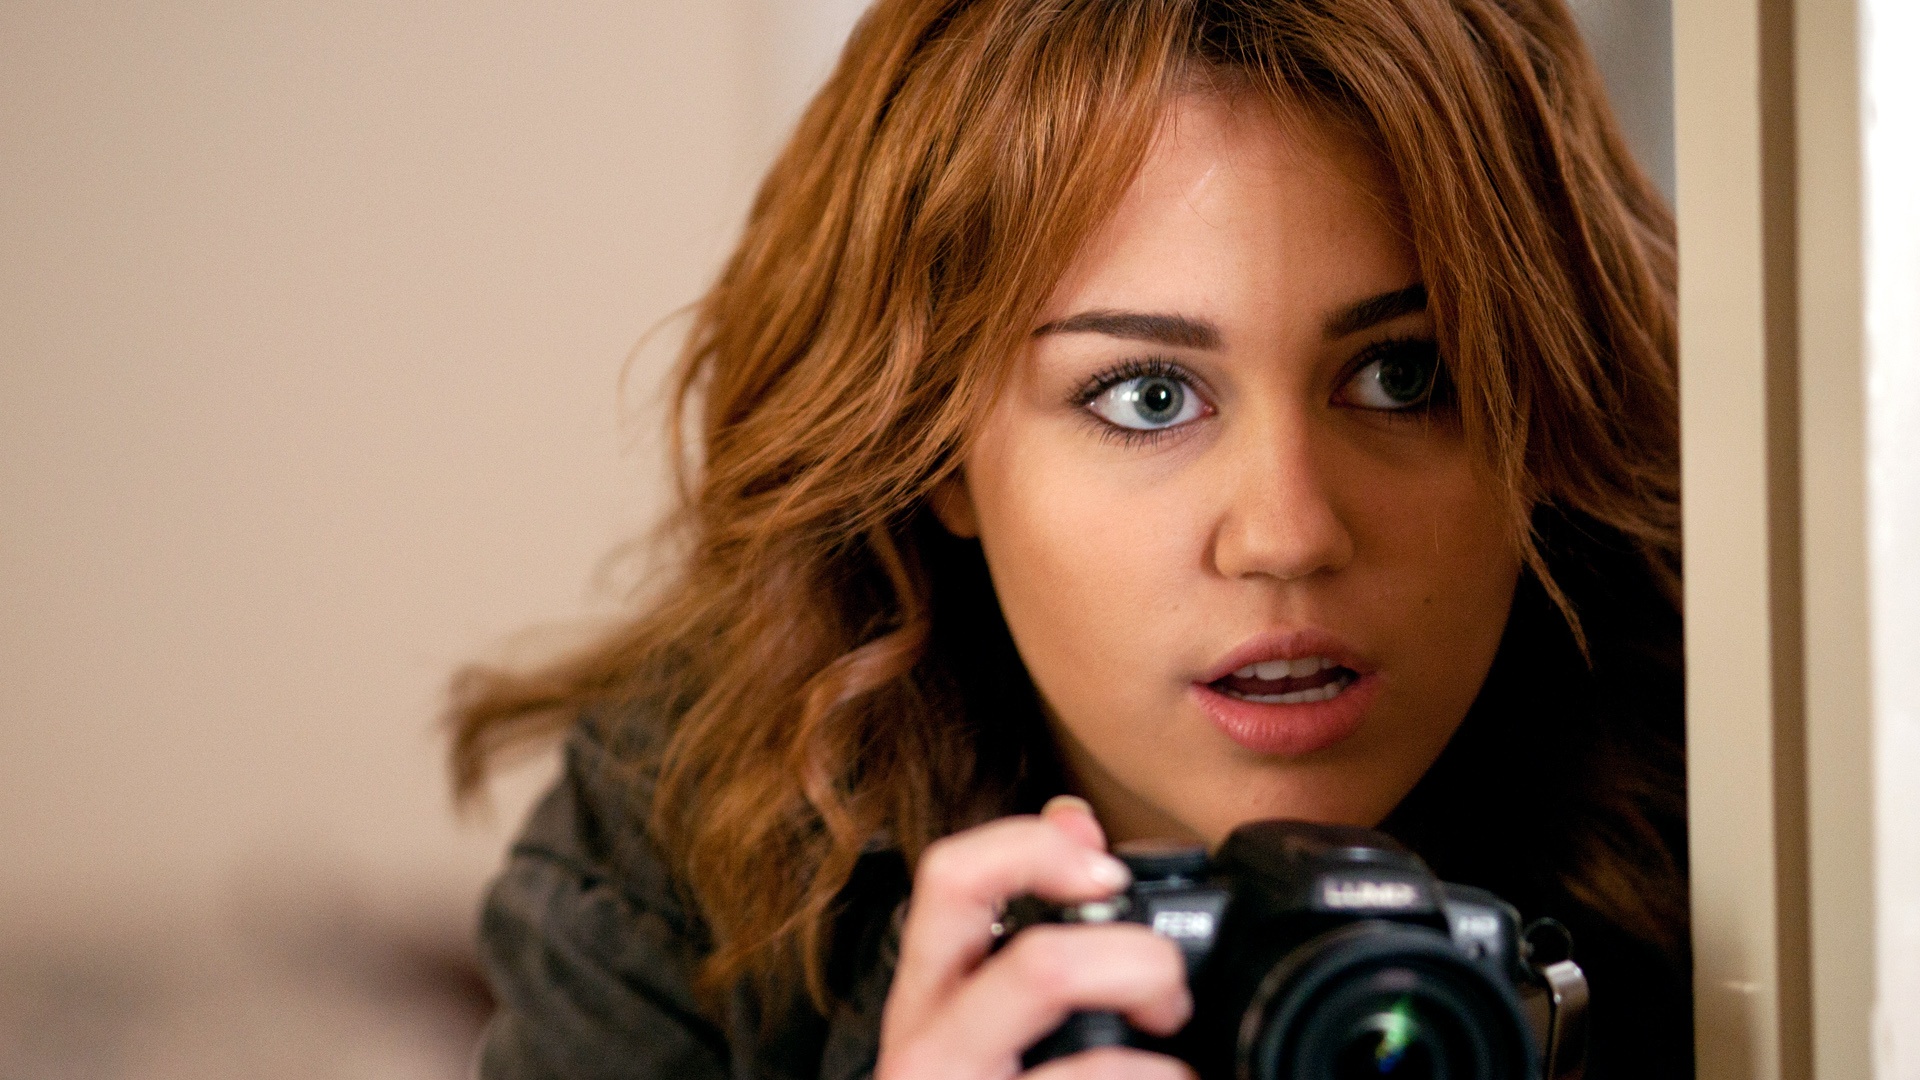 miley cyrus pictures hd A42